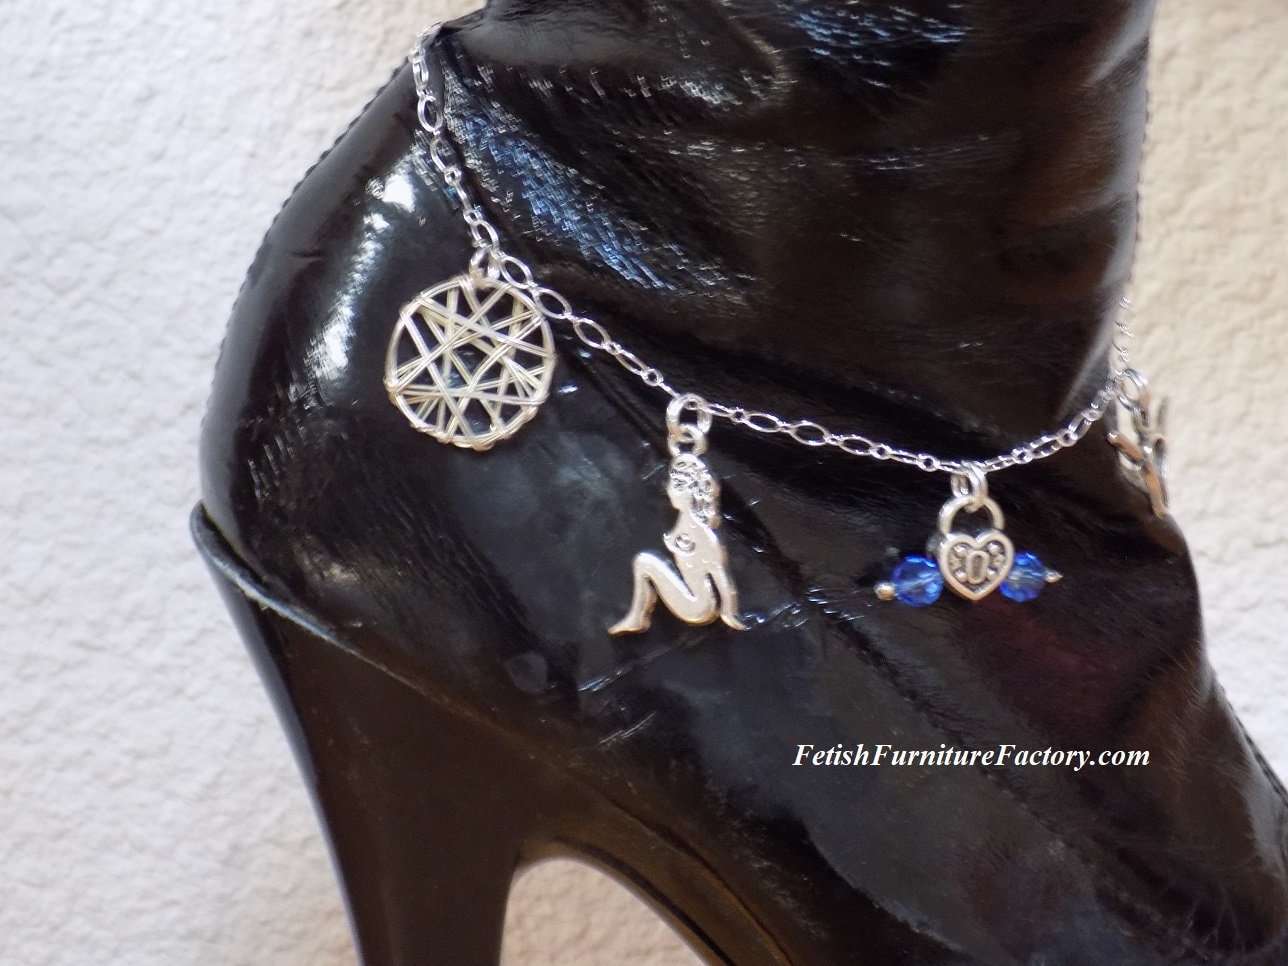 Mature Hotwife Anklet, Hotwife Charms, BDSM Jewelry, Cuckold, Sex Toys, Fetish, Kinky Jewelry, FemDom, Dungeon, Body Jewelry, Swingers, picture